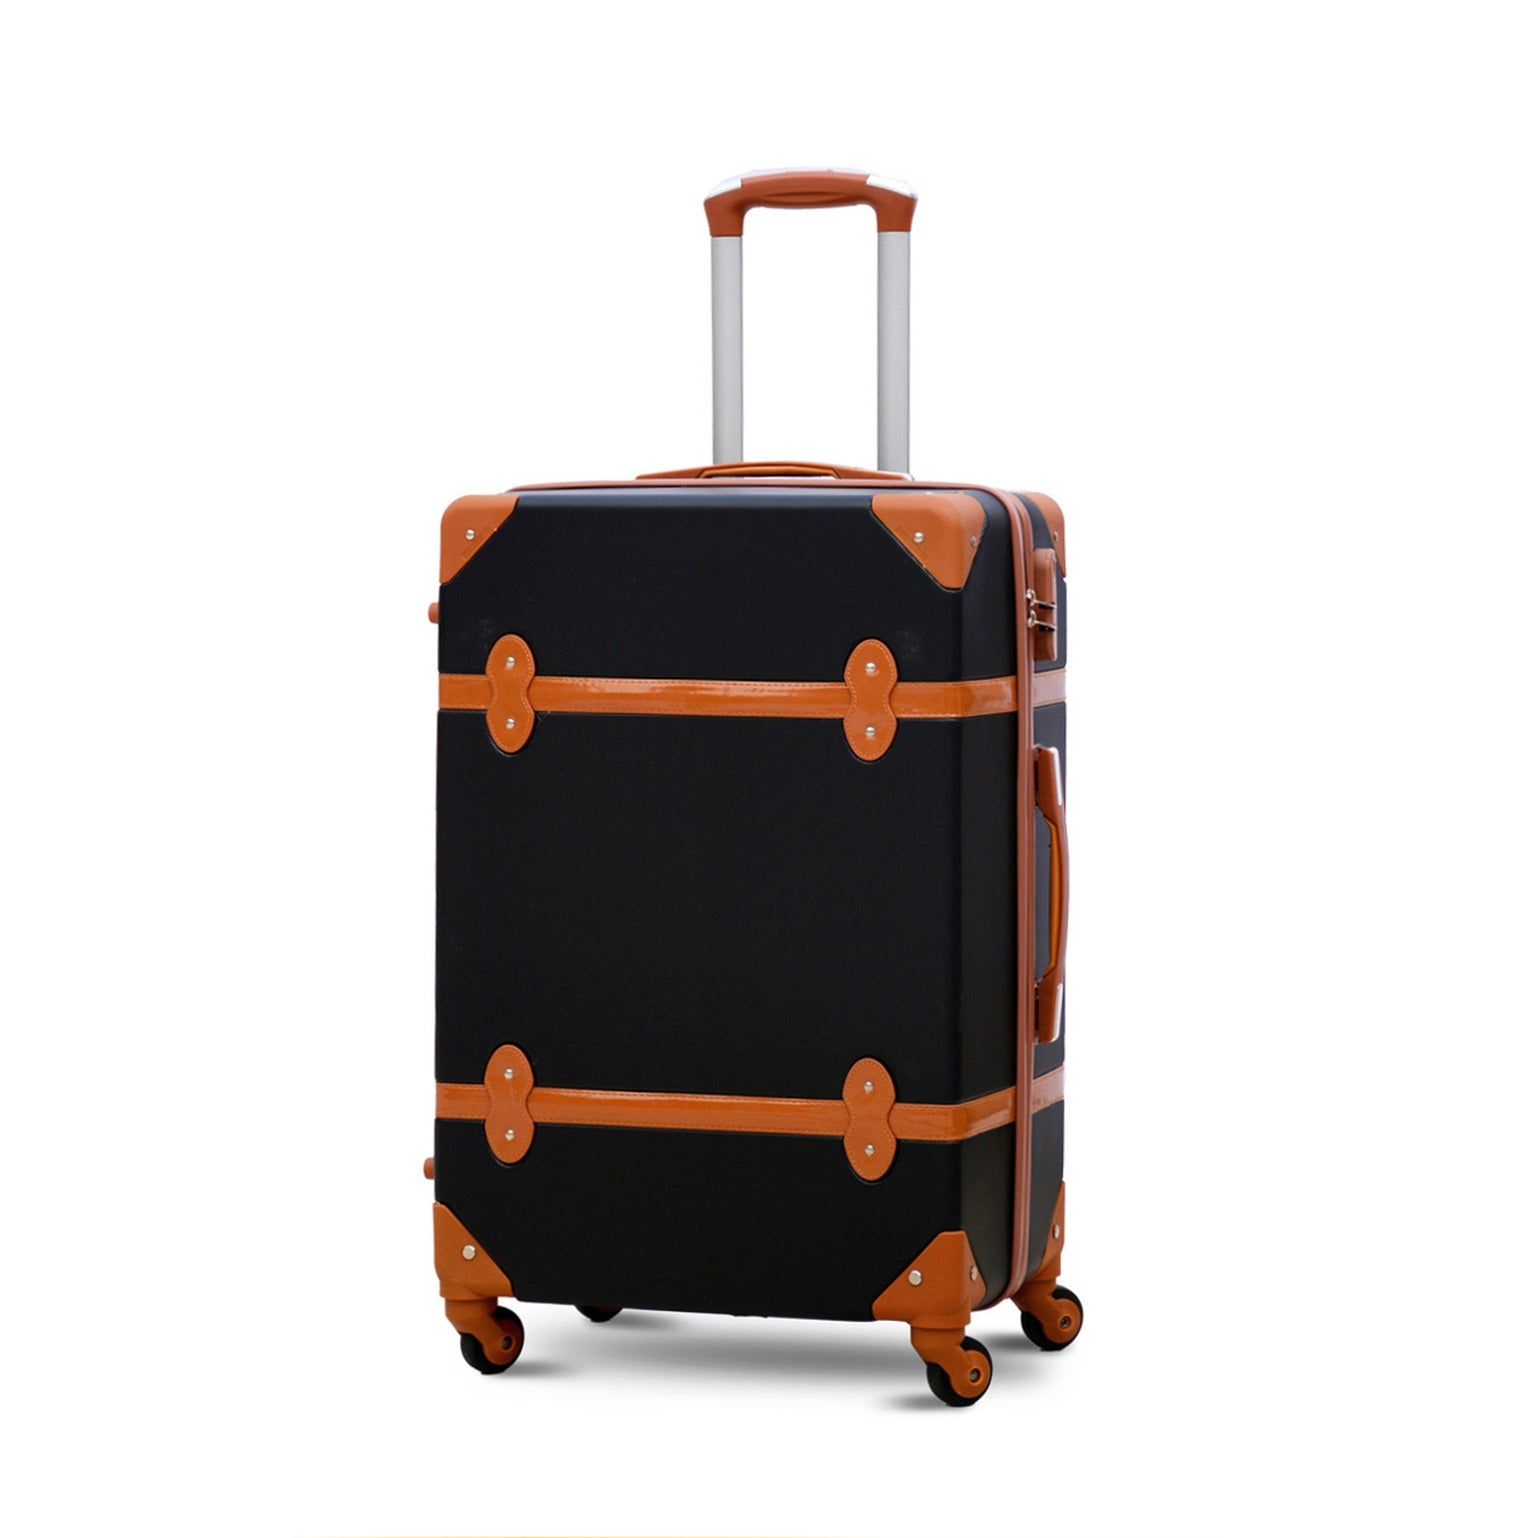 28" Corner Guard ABS Lightweight Luggage Bag with Spinner Wheel